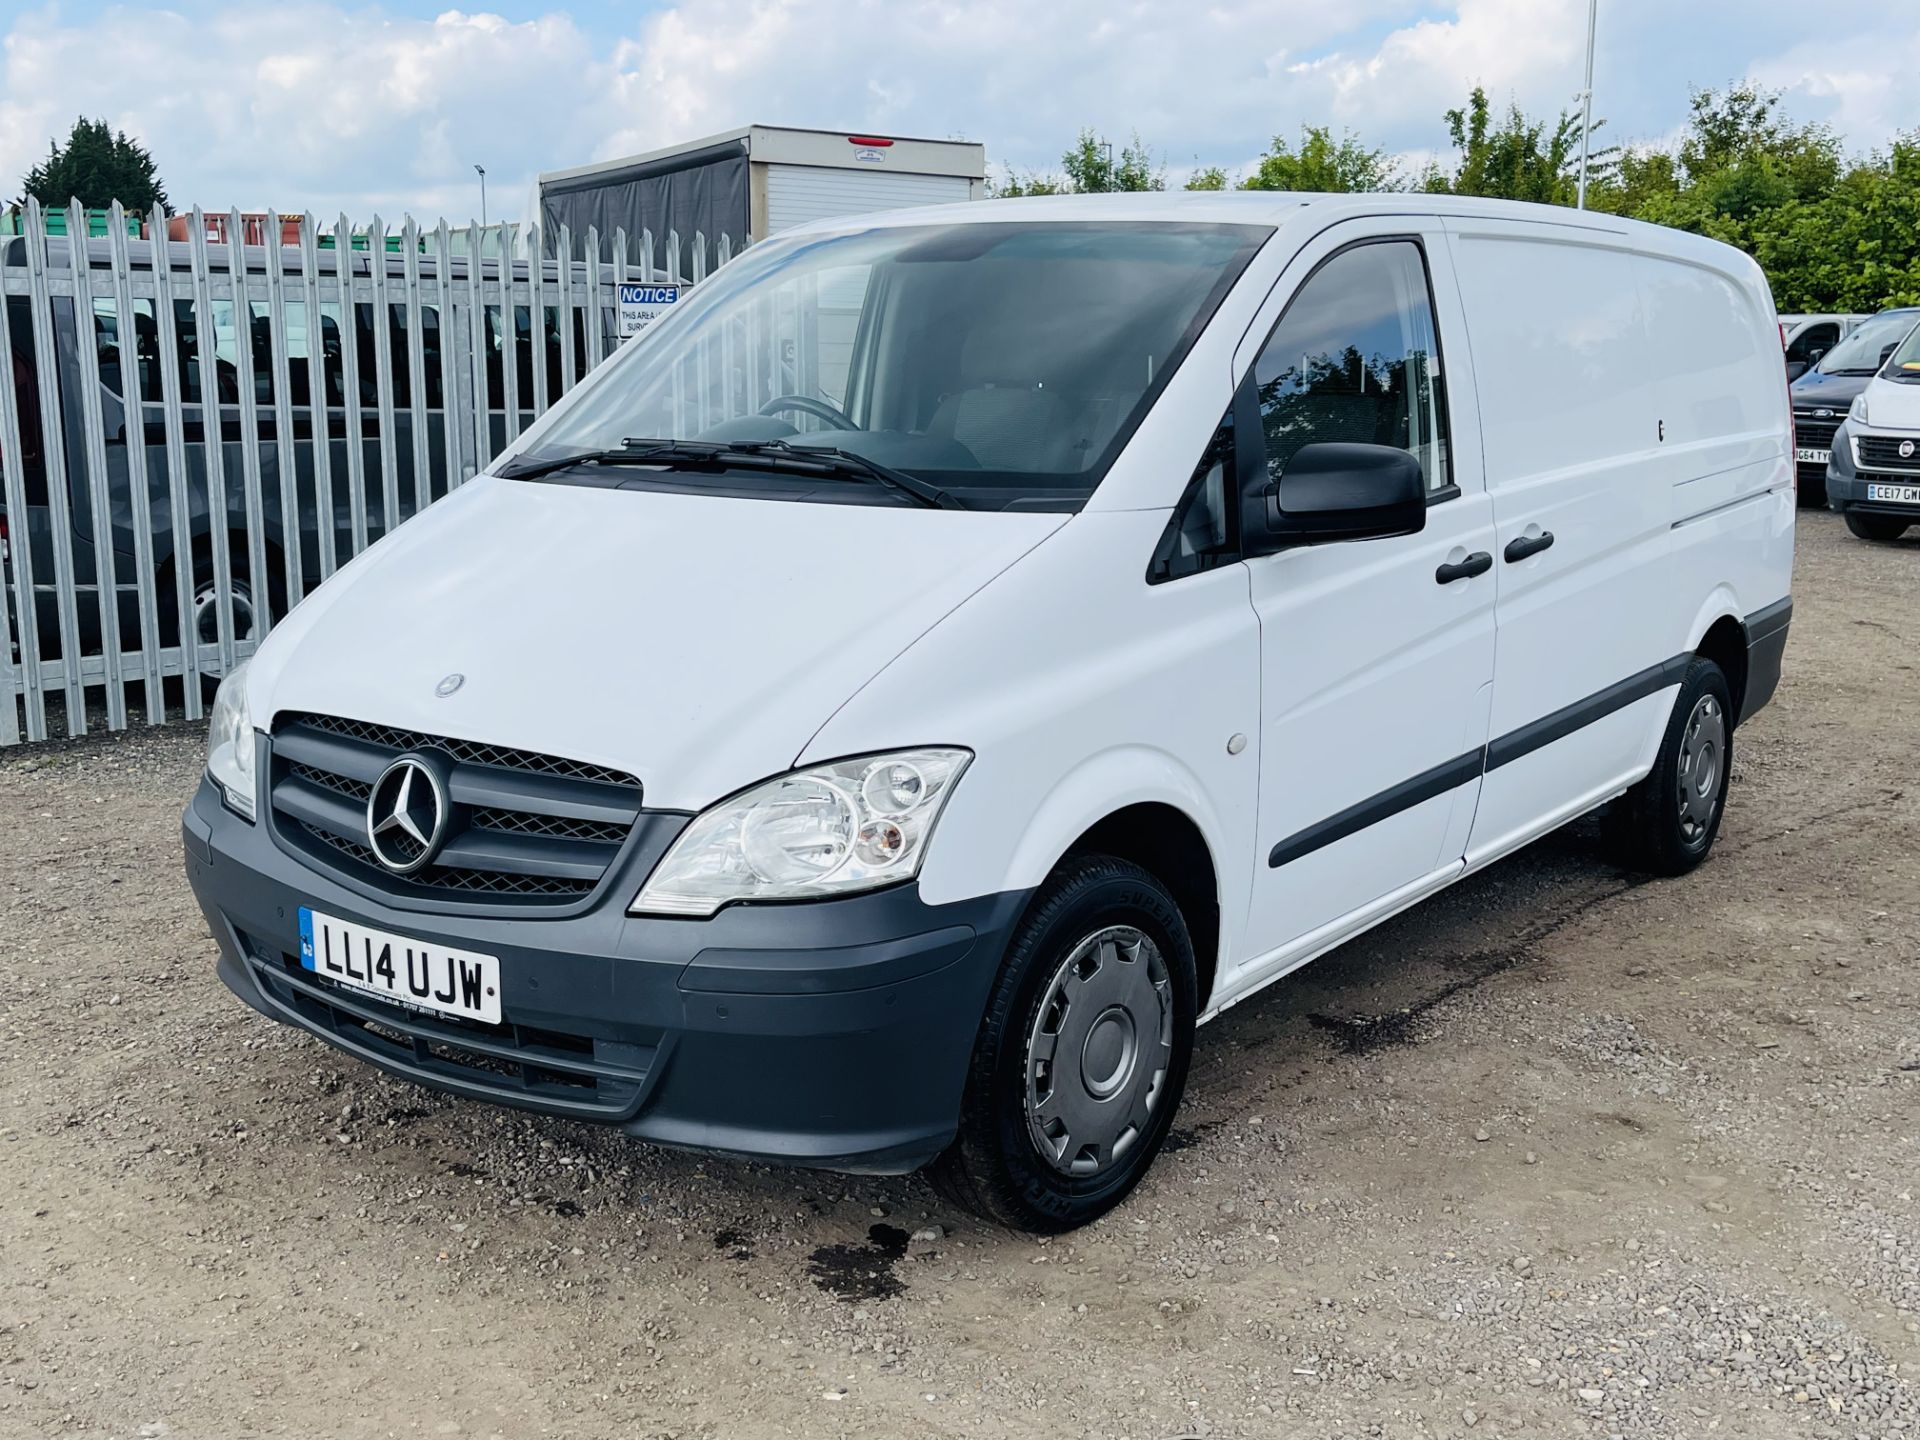 ** ON SALE ** Mercedes-Benz Vito 2.1 113 CDI Long Low Roof - 2014 '14 Reg' - Cruise Control - - Image 3 of 17